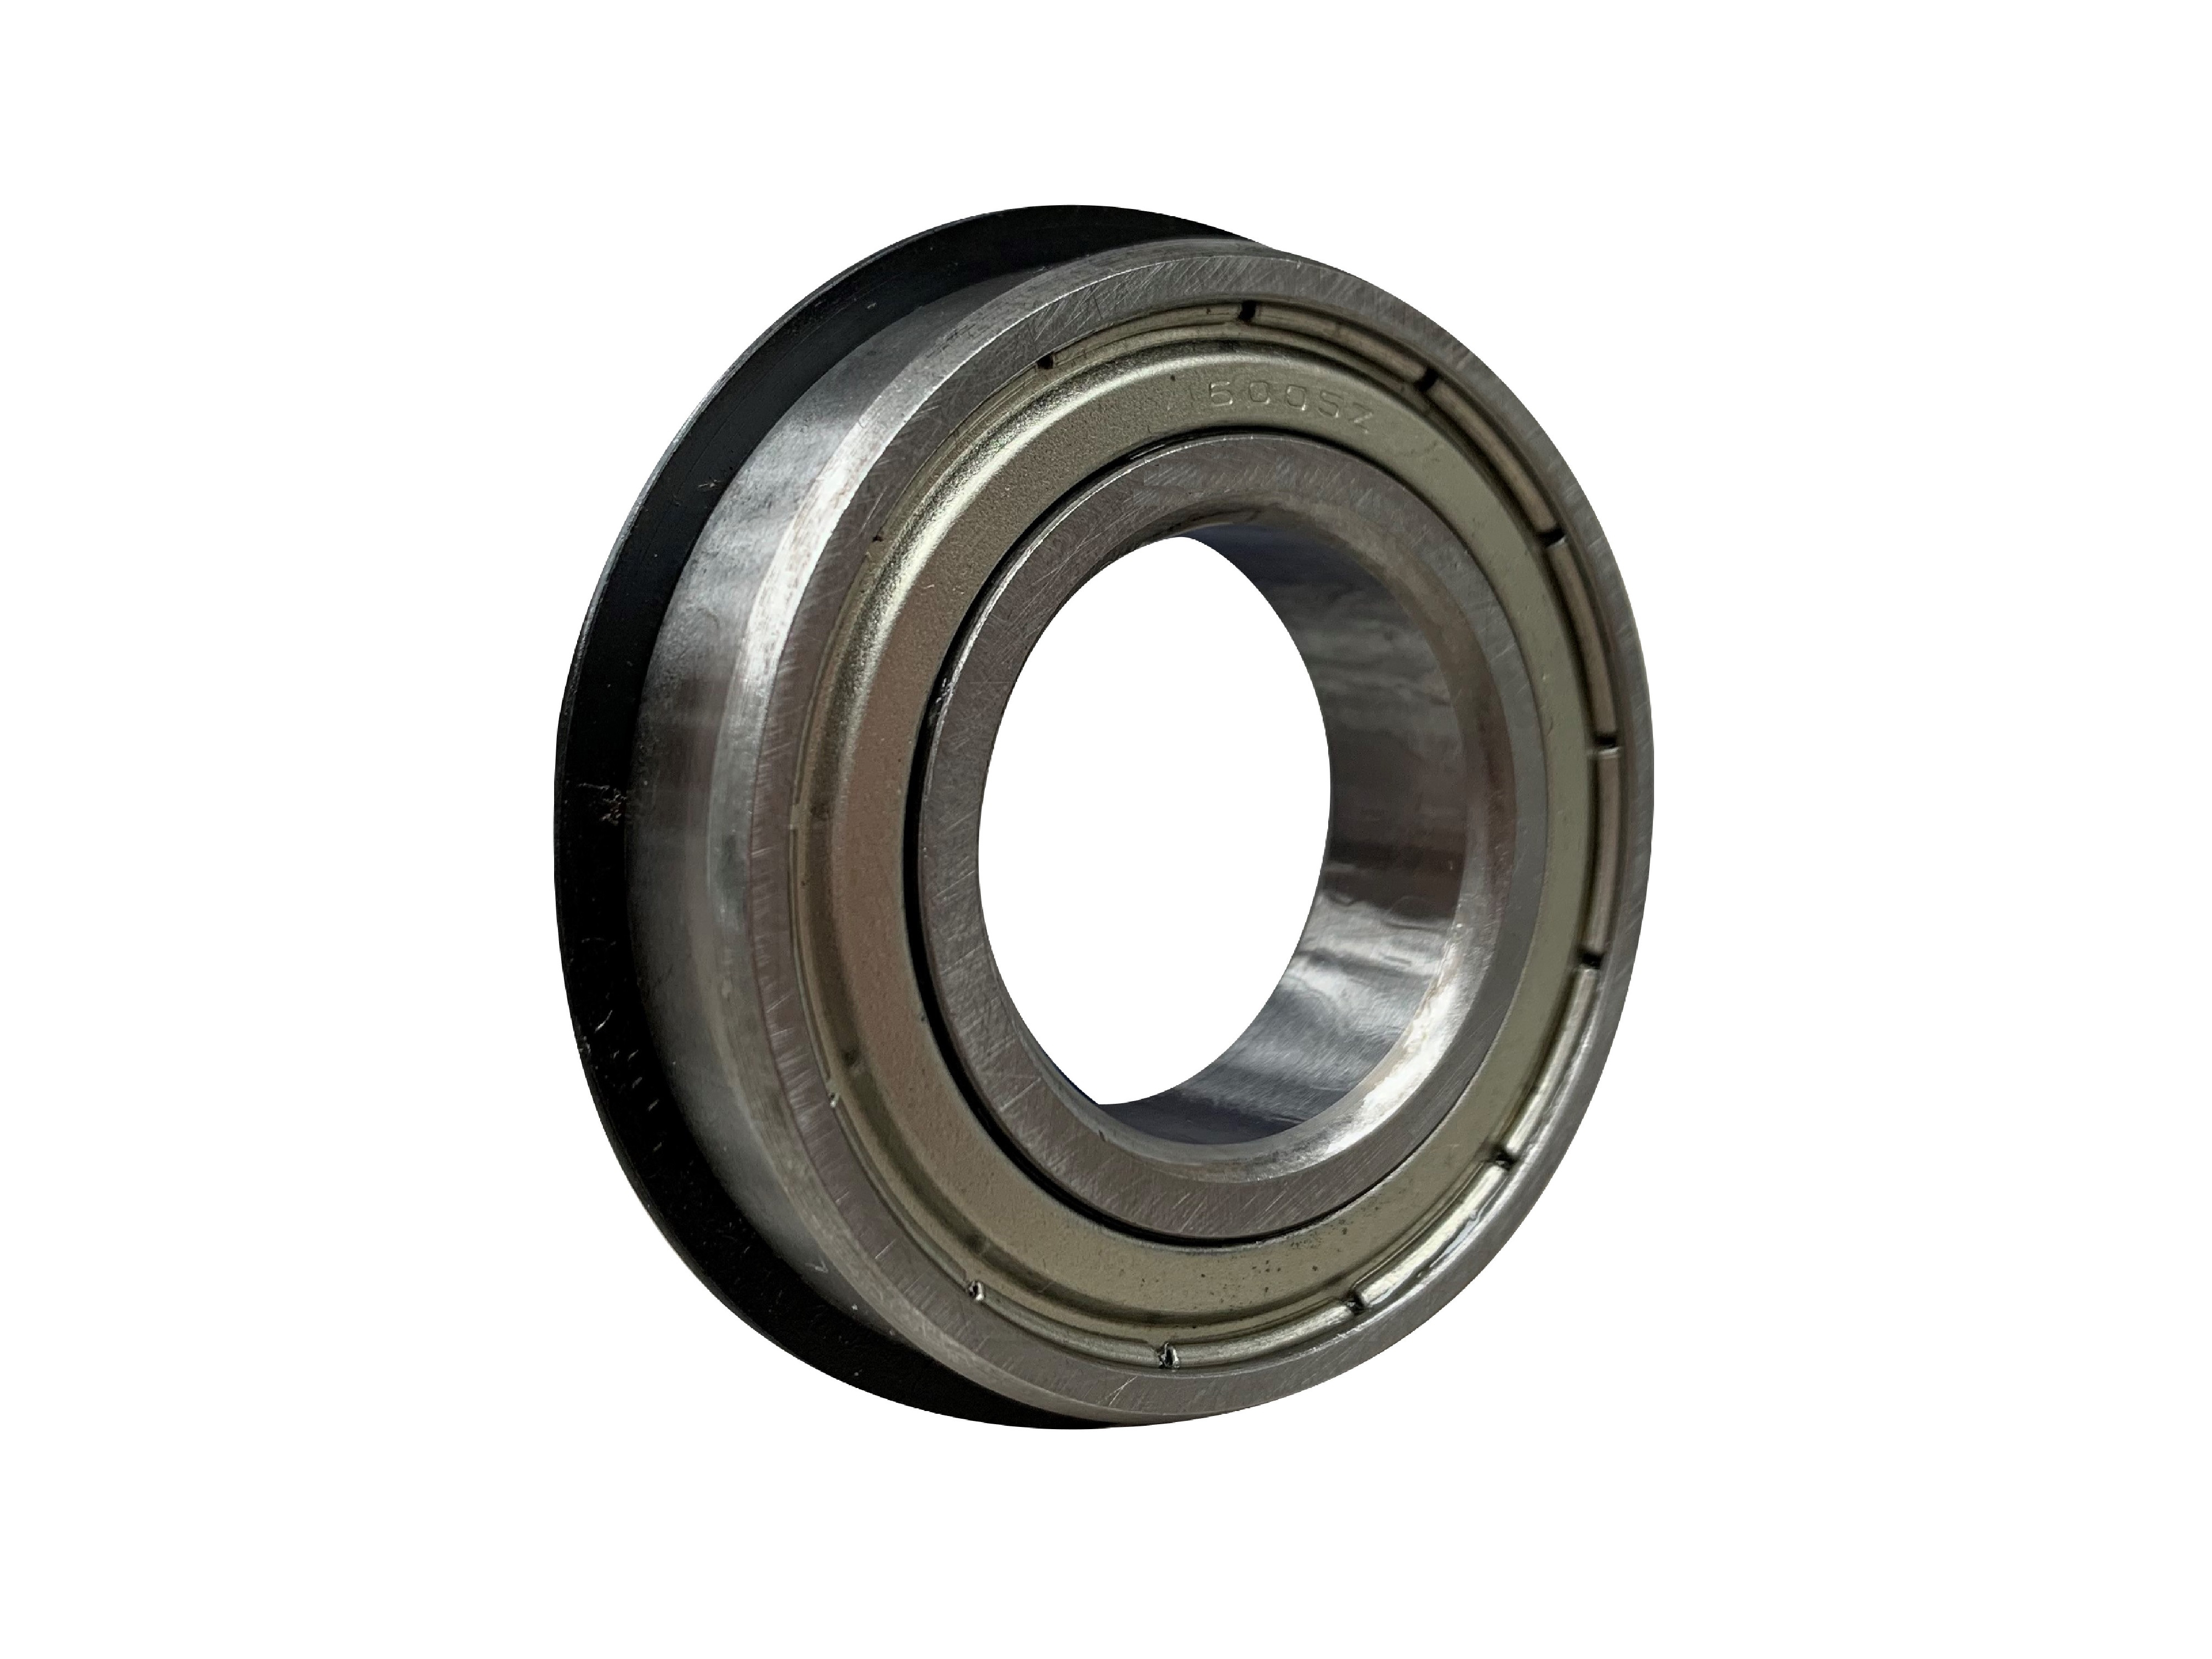 SKF 6203-2ZNR Shielded Ball Bearing With Snap Ring 17mm x 40mm x 12mm